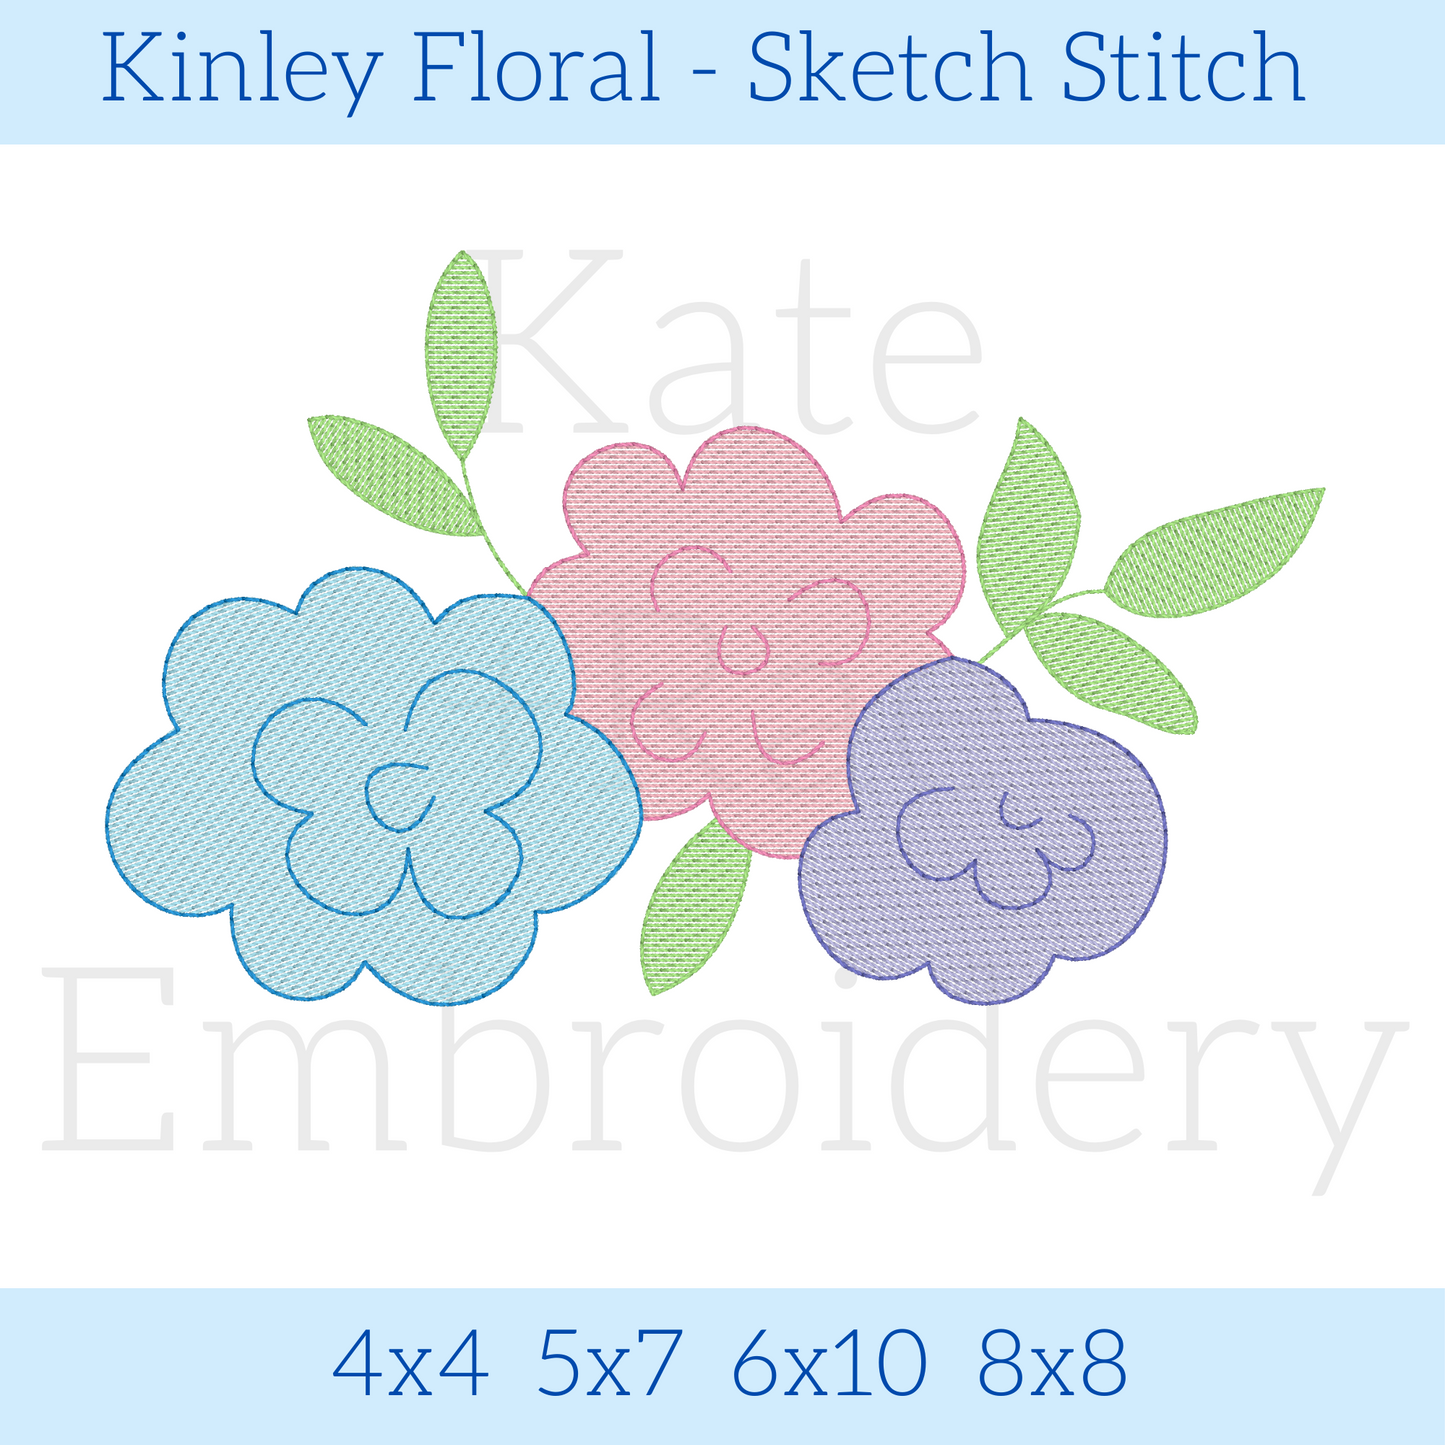 Kinley Floral Sketch Stitch Embroidery Design